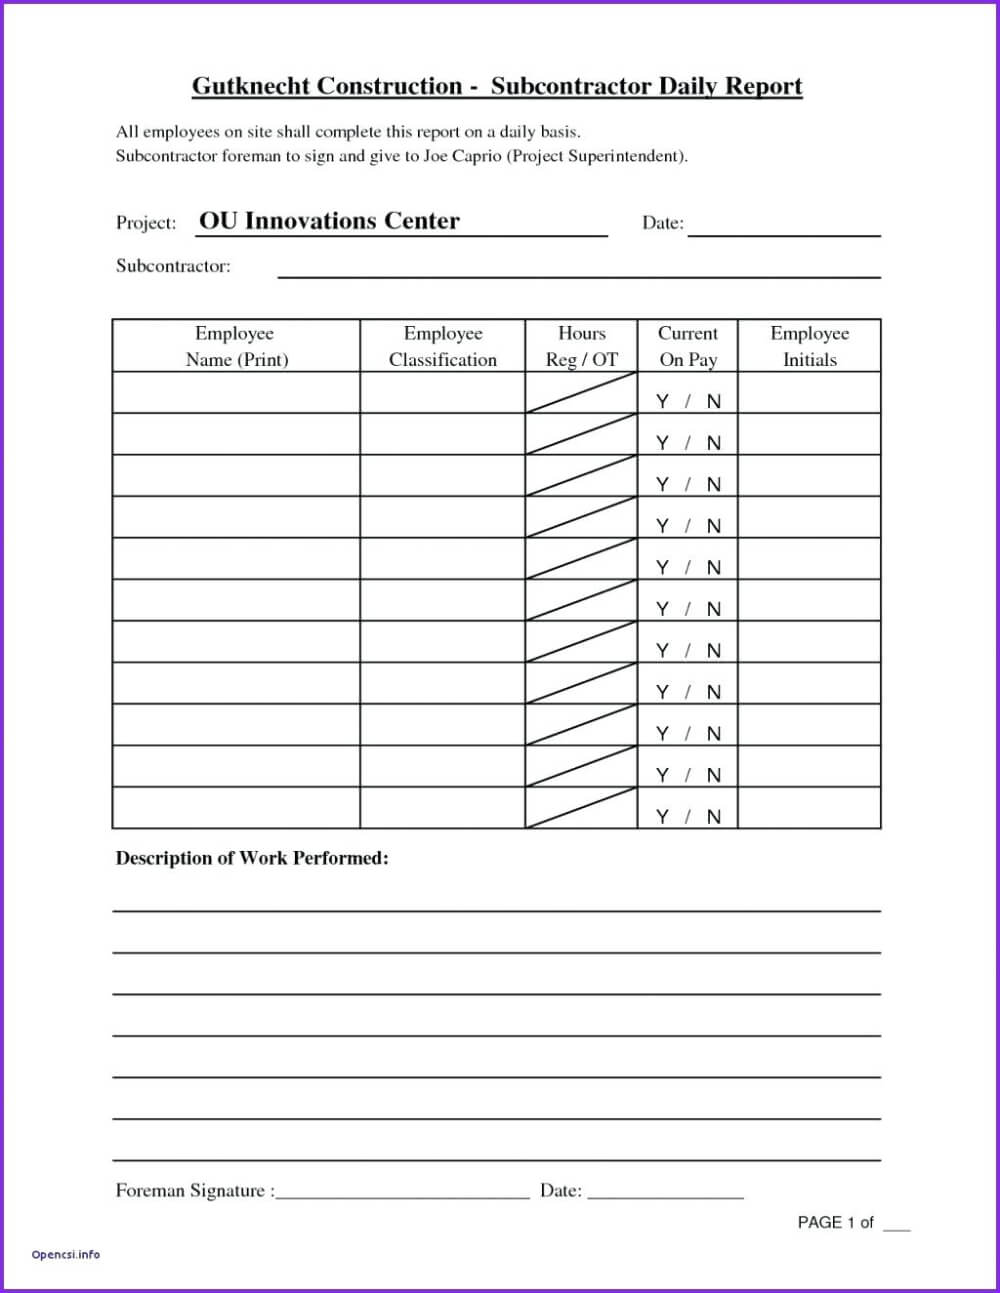 022 Construction Daily Report Template Ideas Form Lovely Regarding Free Construction Daily Report Template